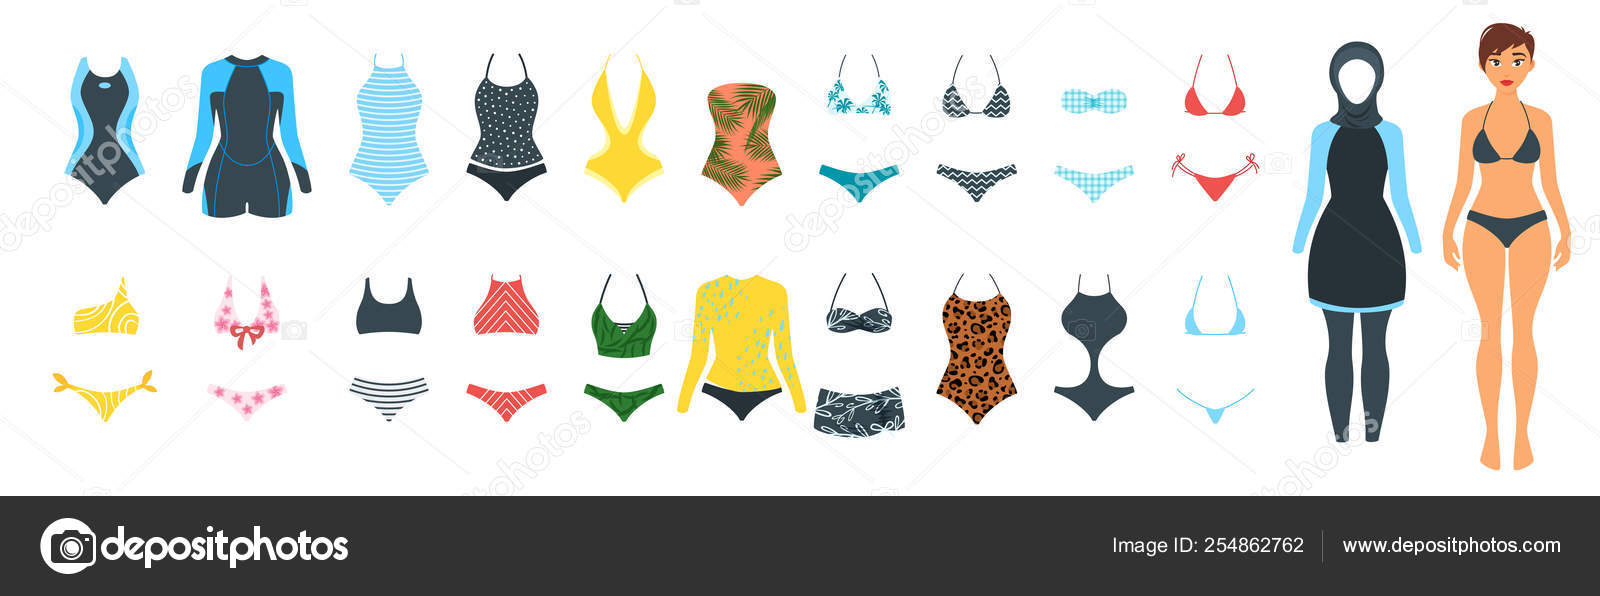 Set Of Female Glamour Swimsuit Icons. Different Types Of Beachwear